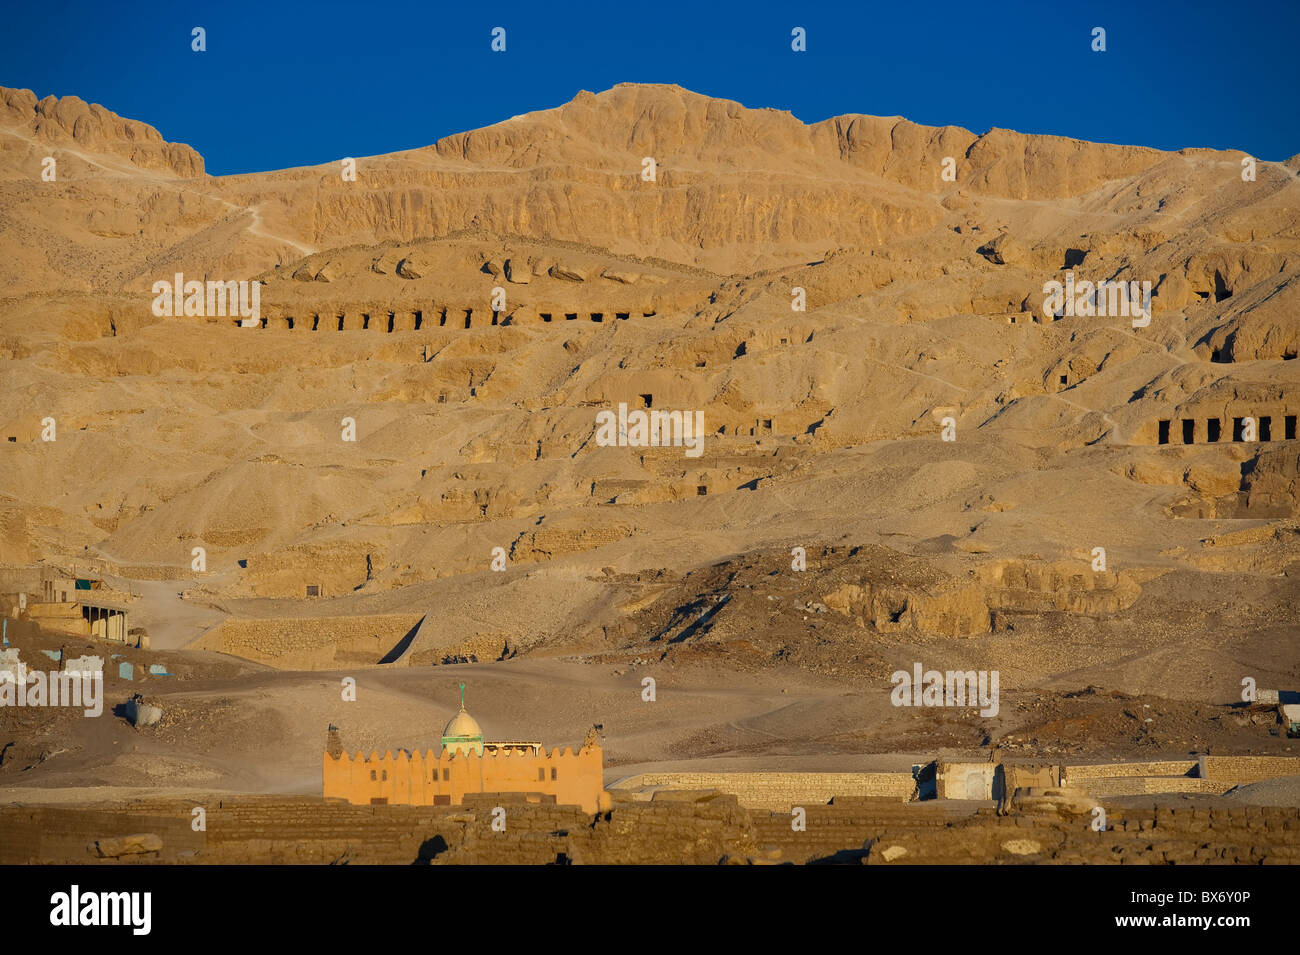 A long telephoto image of the Valley of the Kings in Egypt at sunrise with a mosque in the foreground Stock Photo